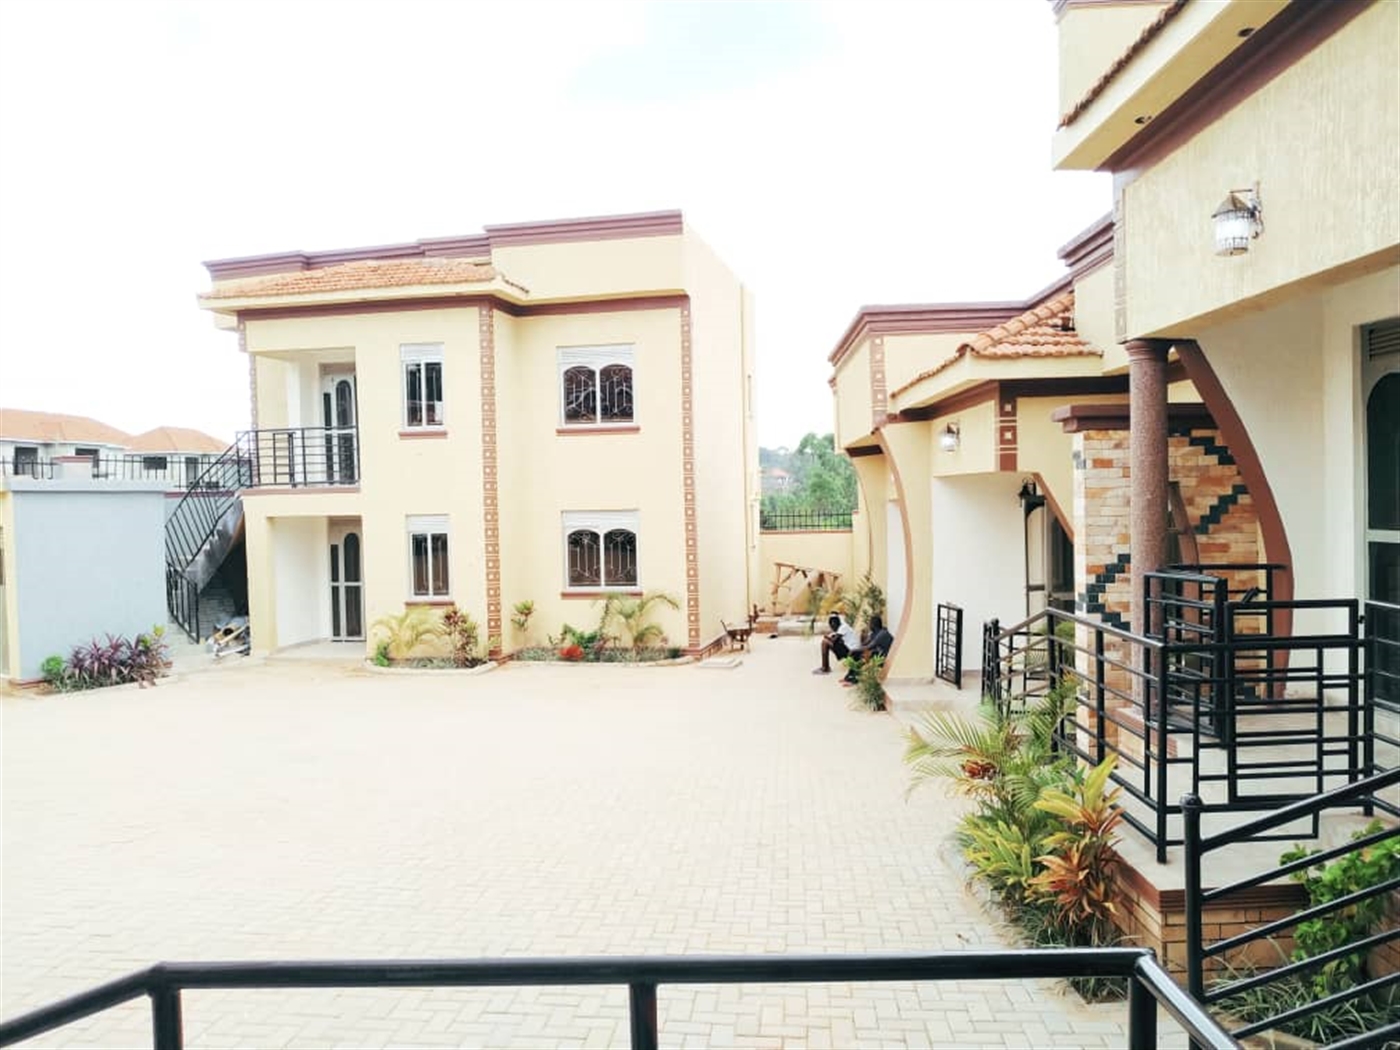 Rental units for sale in Buwate Wakiso